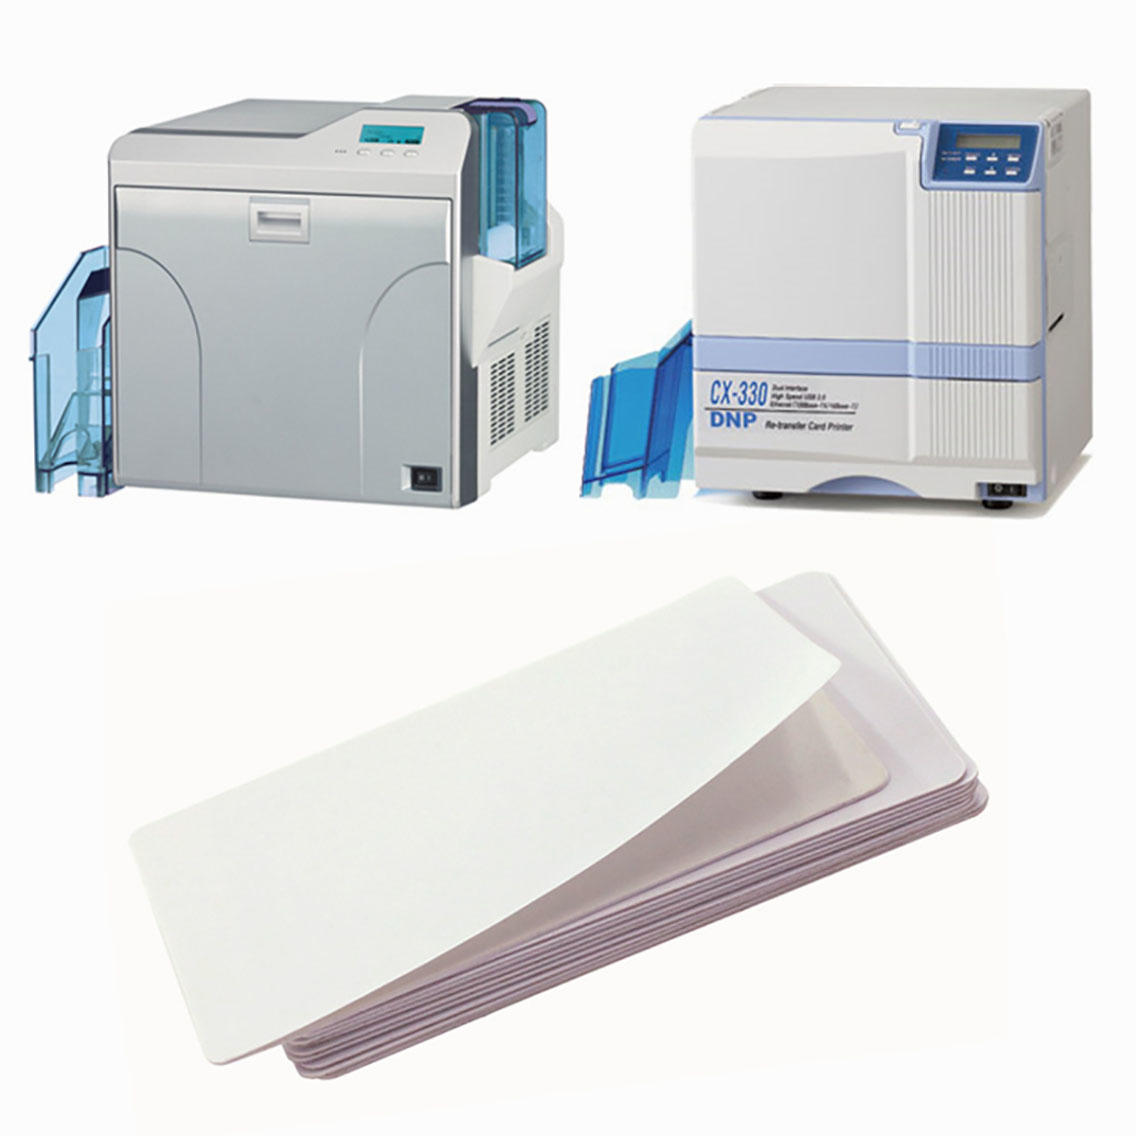 Cleanmo professional Dai Nippon Printer Cleaning Kits manufacturer for DNP CX-210, CX-320 & CX-330 Printers